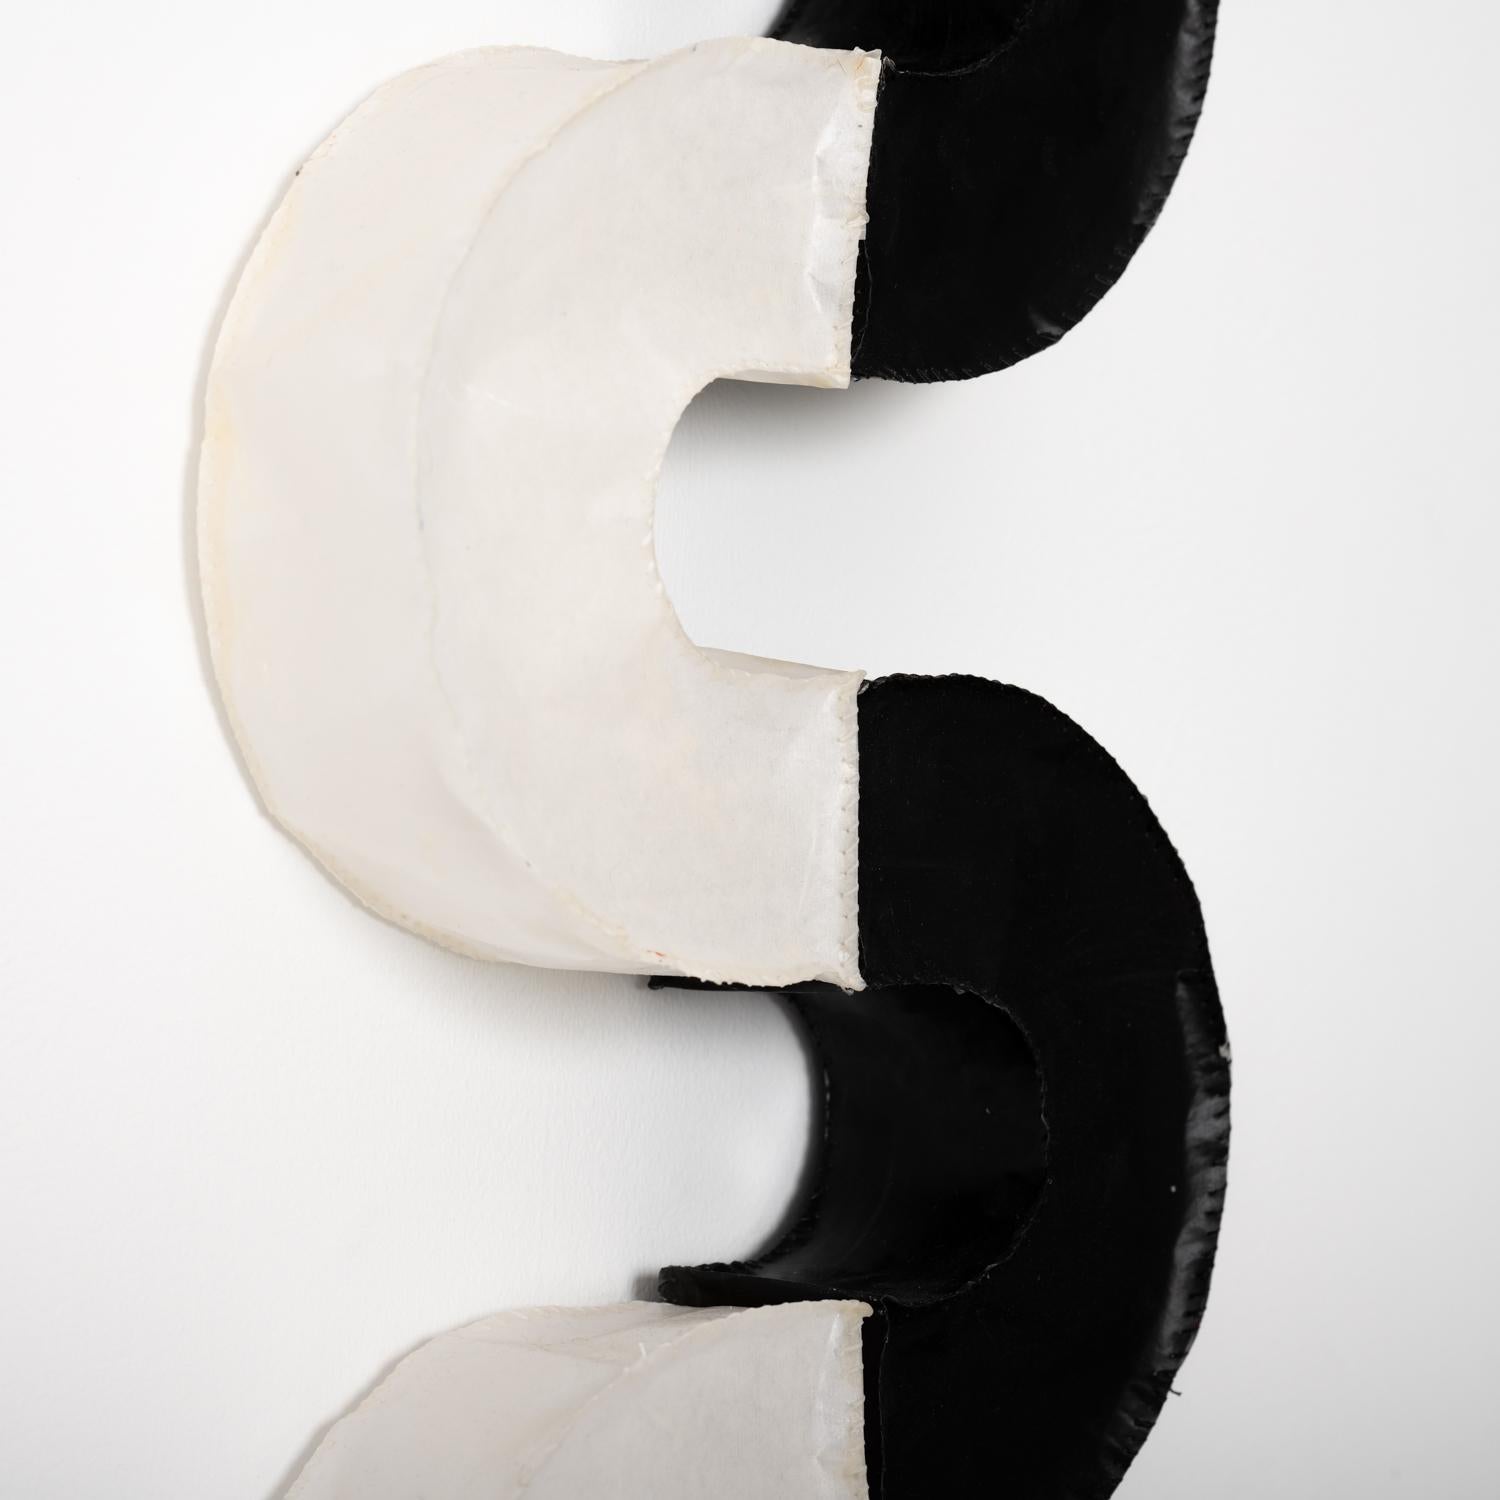 Abstract minimalist three-dimensional wall sculpture in black and white
